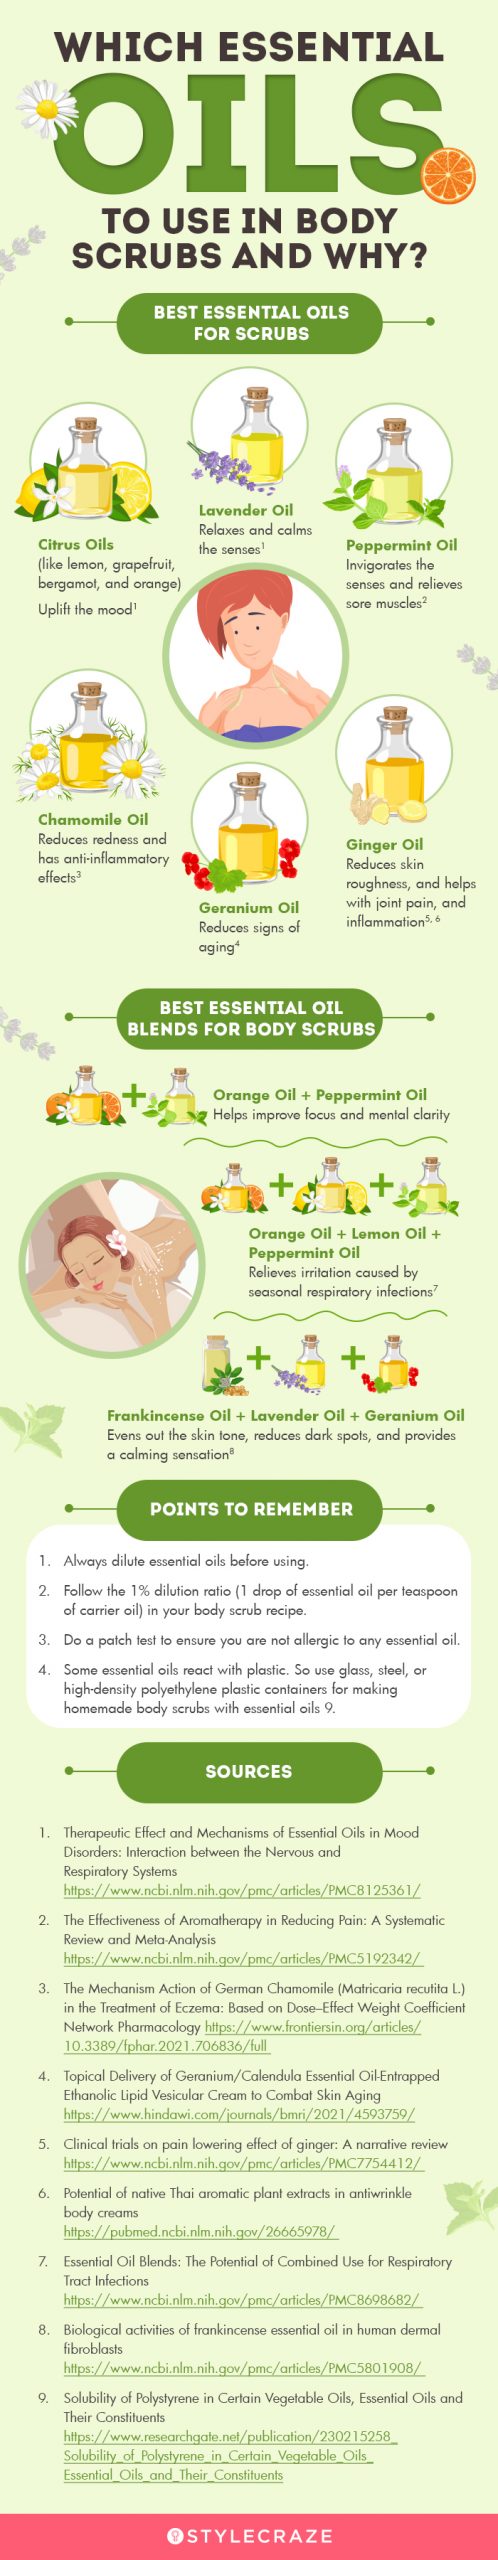 best essential oils for scrubs (infographic)